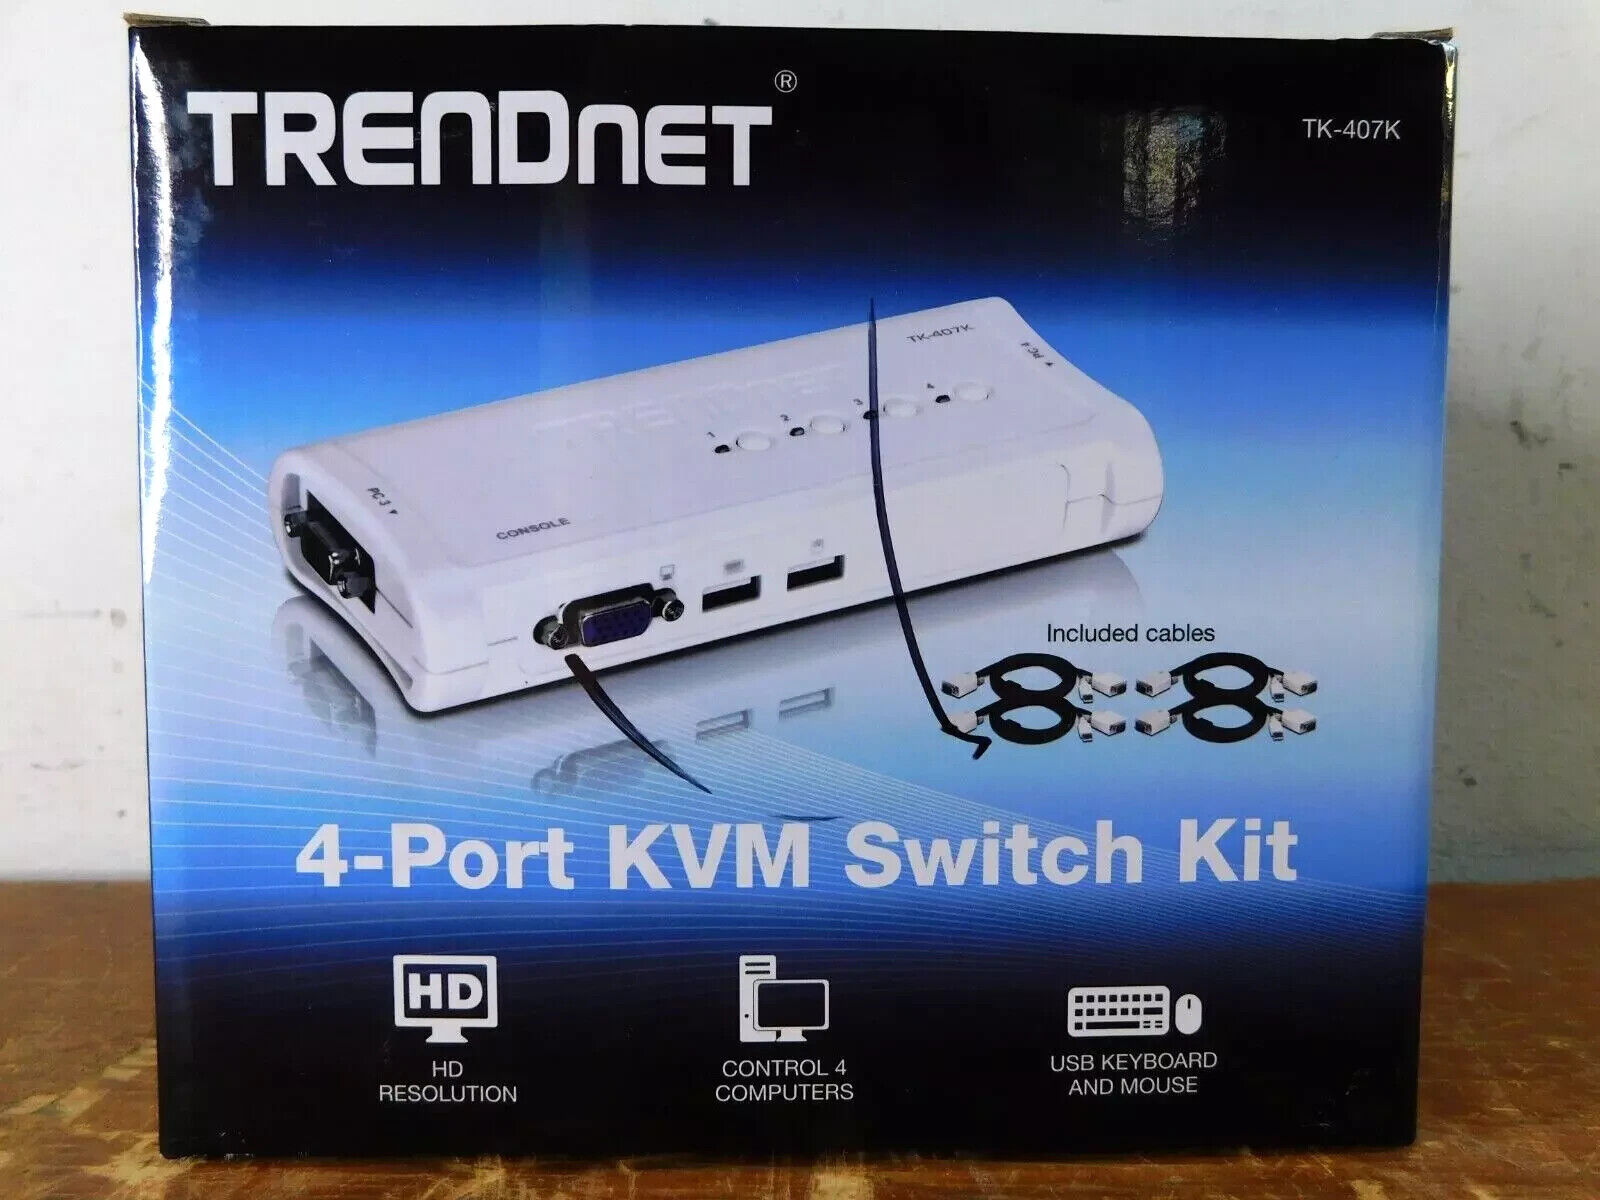 TRENDnet 4-Port USB KVM Switch Kit,VGA and USB Connections,2048 x 1536 Cable Inc